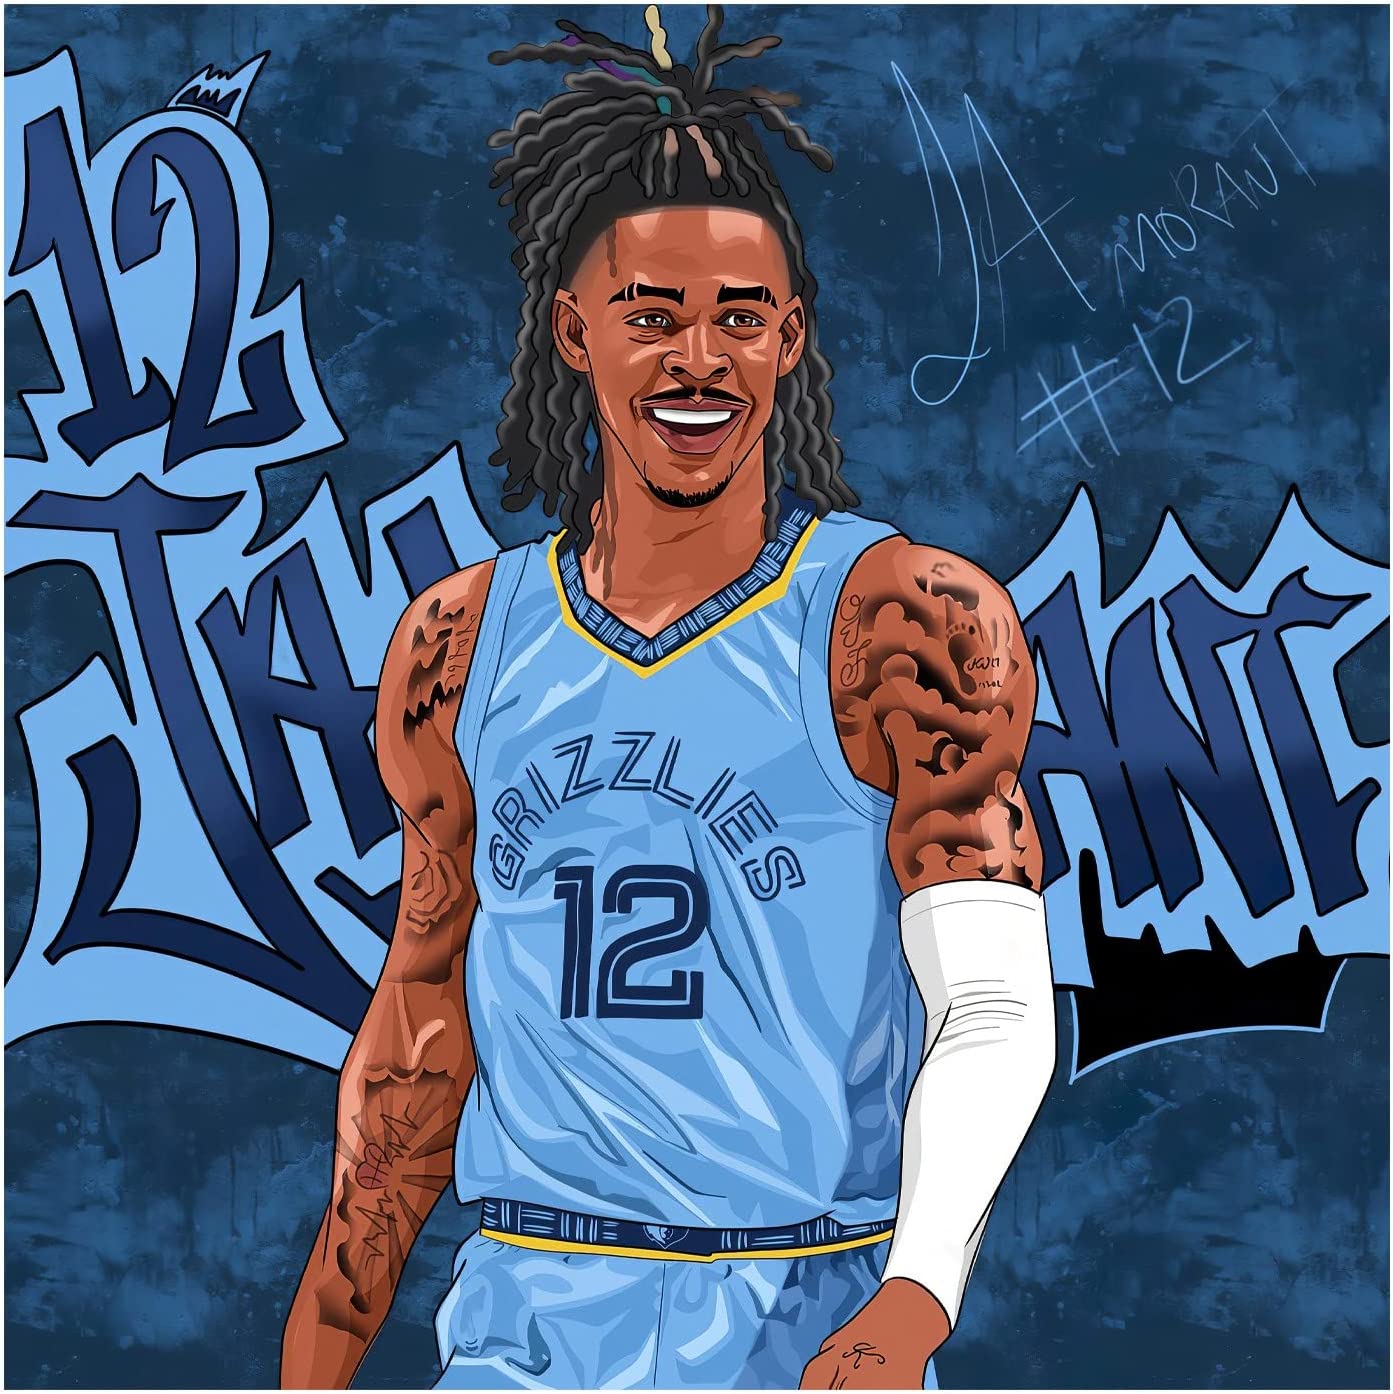 Buy ja morant square ic q version canvas print posterposters for boys roomcollege dorm living room bedroom wall art decor emxee xno frameda online at lowest price in bbdqvm